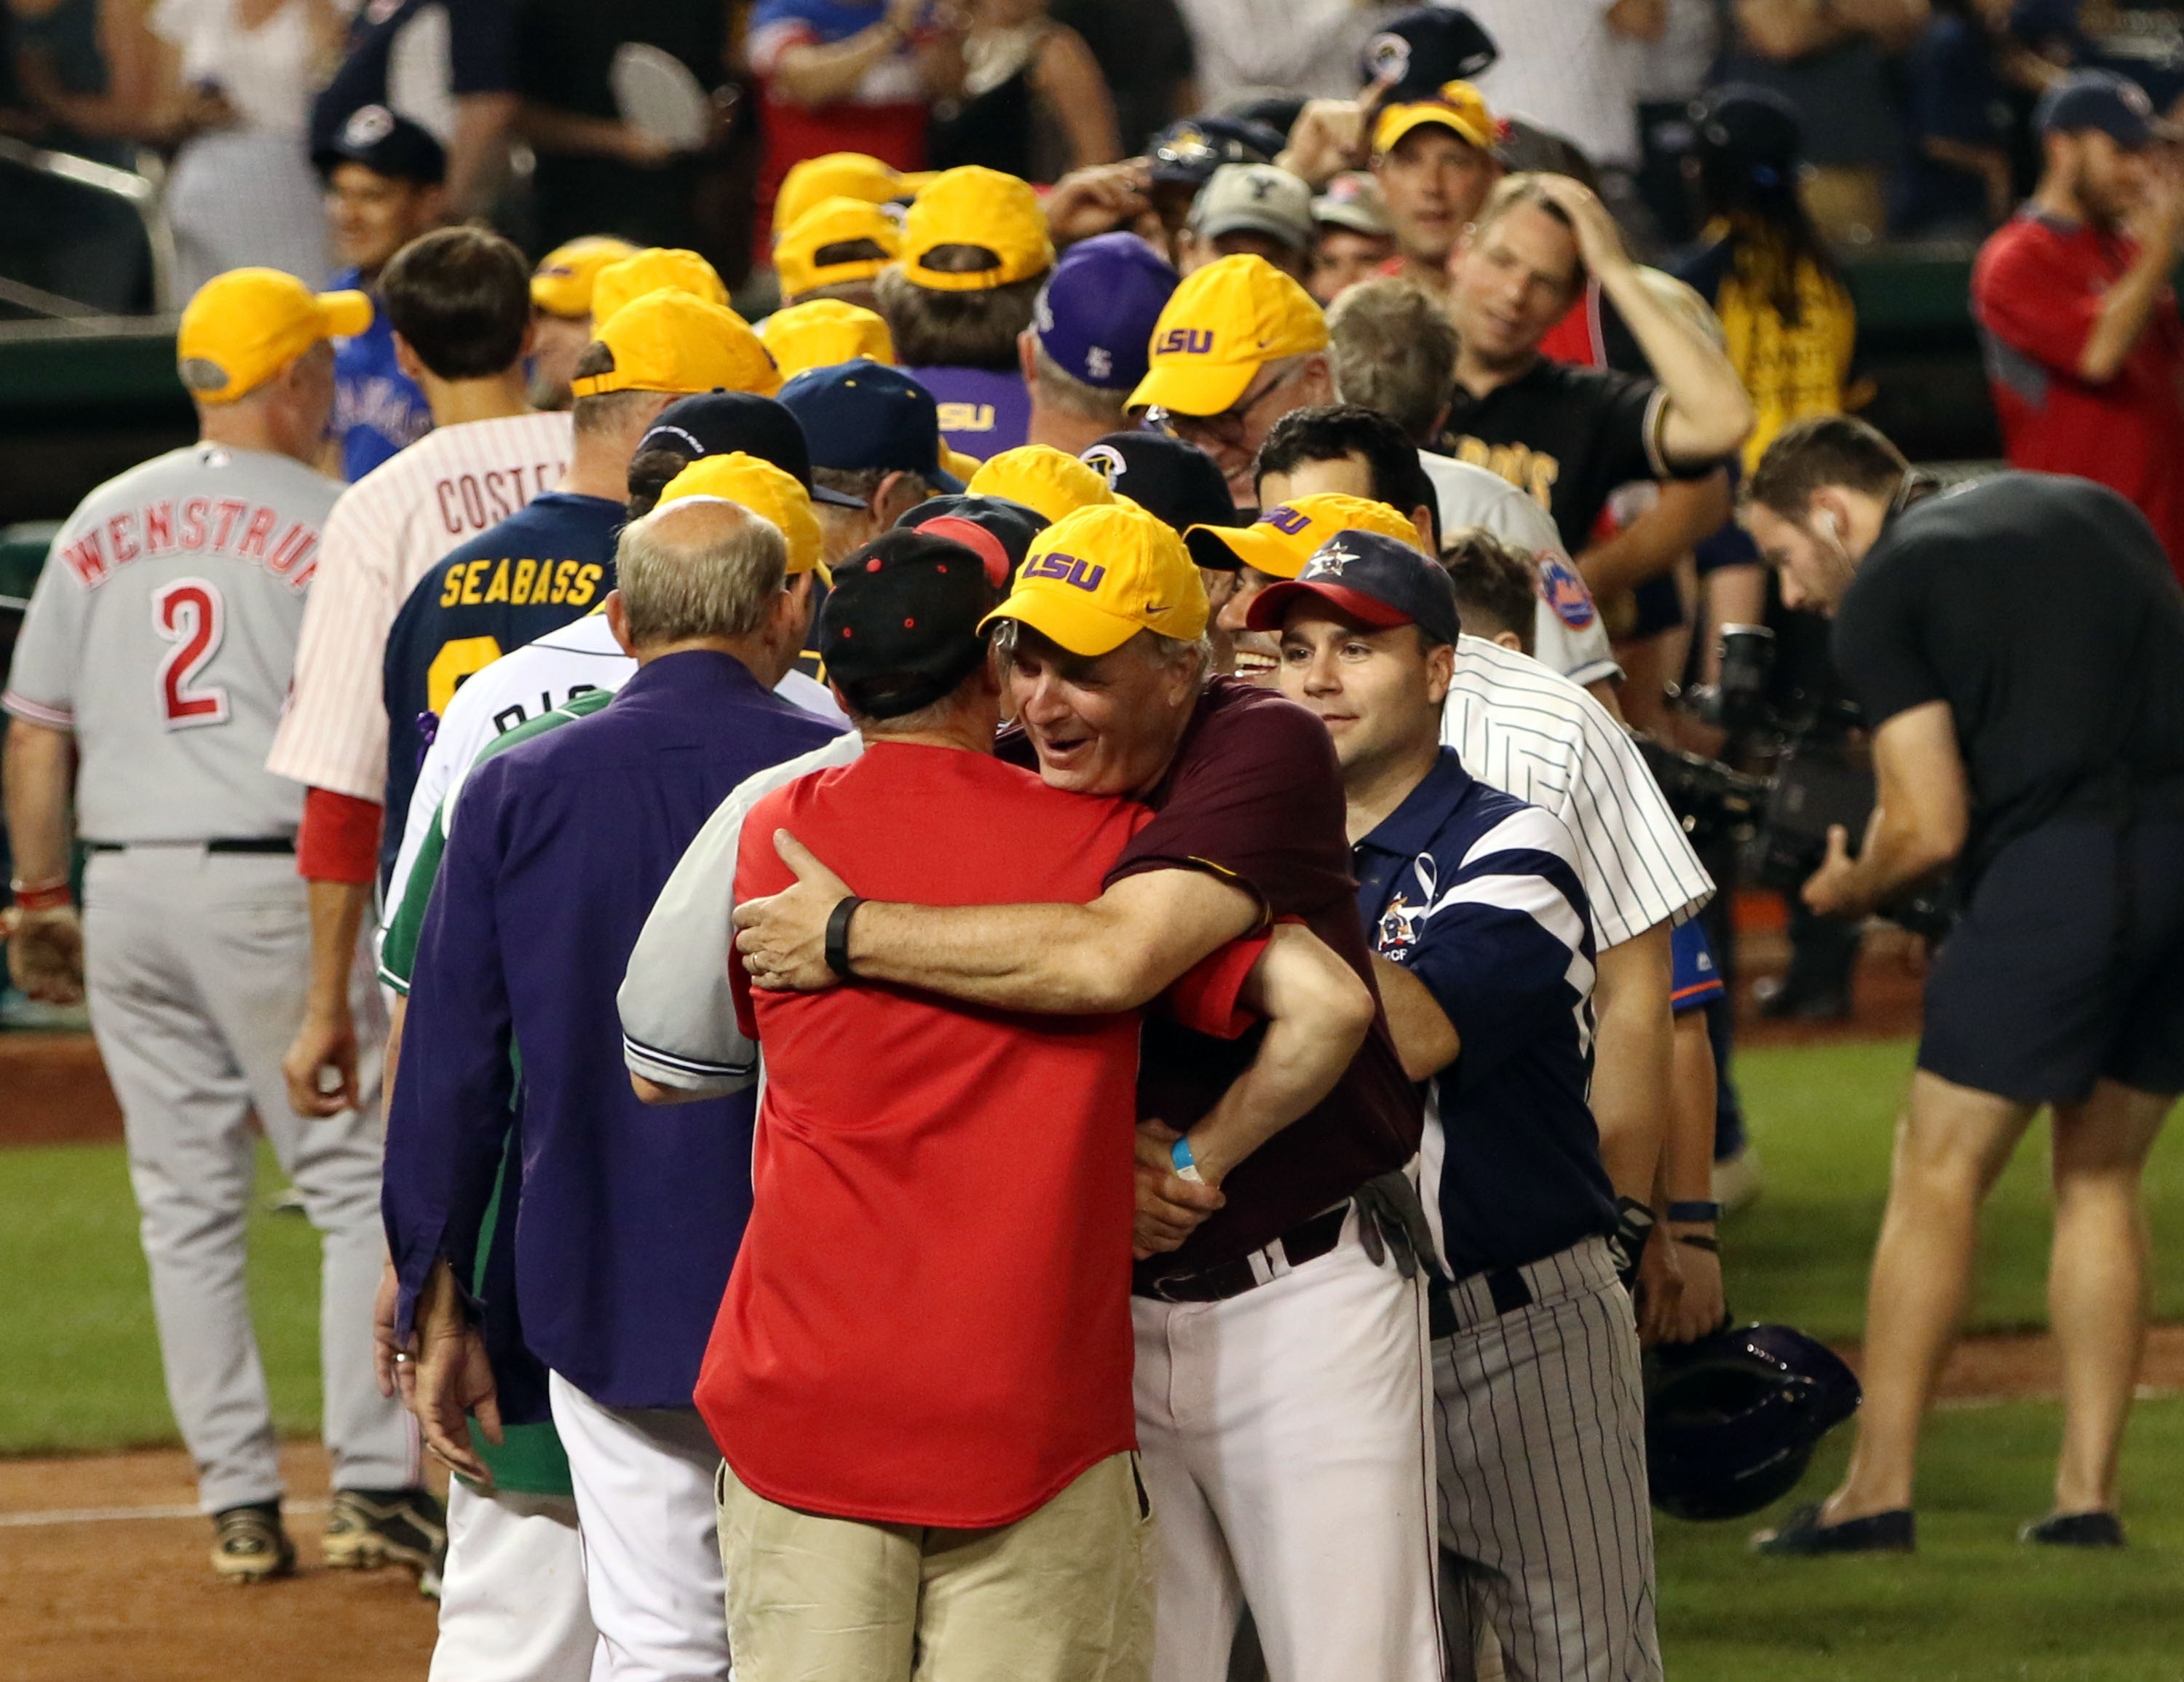 After Congressional shooting, baseball is again here to help heal